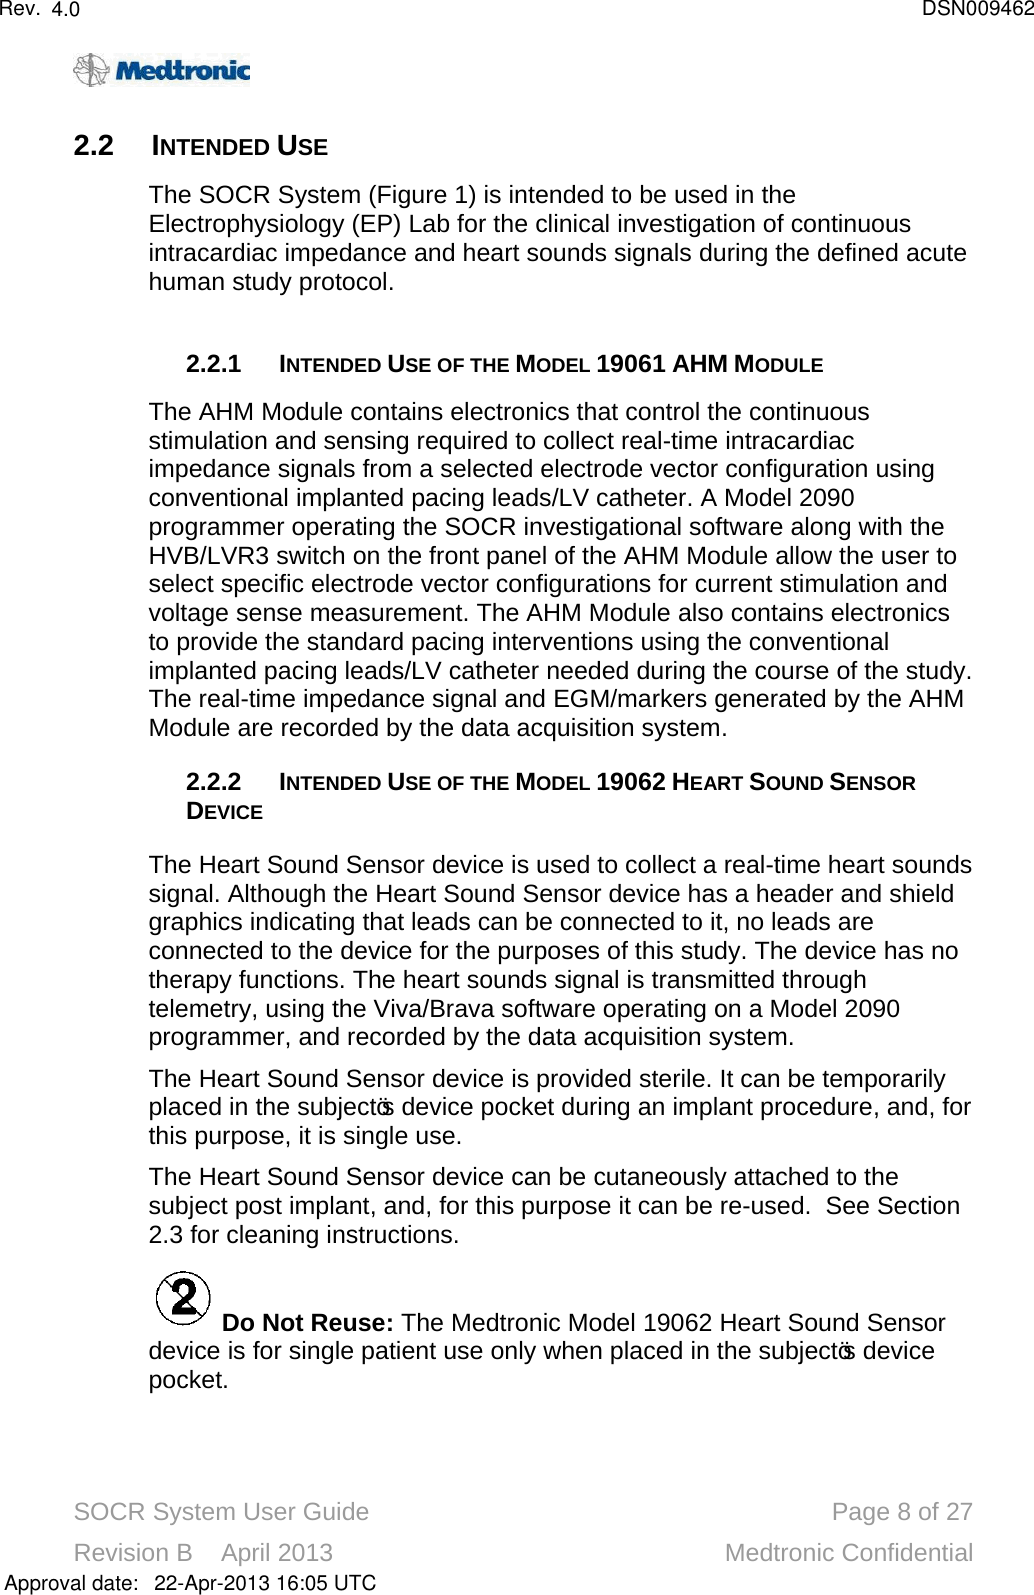 SOCR System User Guide Page 8of 27Revision B    April 2013 Medtronic Confidential2.2 INTENDED USEThe SOCR System (Figure 1) is intended to be used in the Electrophysiology (EP) Lab for the clinical investigation of continuous intracardiac impedance and heart sounds signals during the defined acute human study protocol.  2.2.1 INTENDED USE OF THE MODEL 19061 AHM MODULEThe AHM Module contains electronics that control the continuous stimulation and sensing required to collect real-time intracardiac impedance signals from a selected electrode vector configuration using conventional implanted pacing leads/LV catheter. A Model 2090 programmer operating the SOCR investigational software along with the HVB/LVR3 switch on the front panel of the AHM Module allow the user to select specific electrode vector configurations for current stimulation and voltage sense measurement. The AHM Module also contains electronics to provide the standard pacing interventions using the conventional implanted pacing leads/LV catheter needed during the course of the study.The real-time impedance signal and EGM/markers generated by the AHM Module are recorded by the data acquisition system. 2.2.2 INTENDED USE OF THE MODEL 19062 HEART SOUND SENSORDEVICEThe Heart Sound Sensor device is used to collect a real-time heart sounds signal. Although the Heart Sound Sensor device has a header and shield graphics indicating that leads can be connected to it, no leads are connected to the device for the purposes of this study. The device has no therapy functions. The heart sounds signal is transmitted through telemetry, using the Viva/Brava software operating on a Model 2090 programmer, and recorded by the data acquisition system. The Heart Sound Sensor device is provided sterile. It can be temporarily placed in the subject’s device pocket during an implant procedure, and, for this purpose, it is single use. The Heart Sound Sensor device can be cutaneously attached to the subject post implant, and, for this purpose it can be re-used.  See Section 2.3 for cleaning instructions.Do Not Reuse: The Medtronic Model 19062 Heart Sound Sensordevice is for single patient use only when placed in the subject’s device pocket.Approval date:4.0 DSN00946222-Apr-2013 16:05 UTCRev.